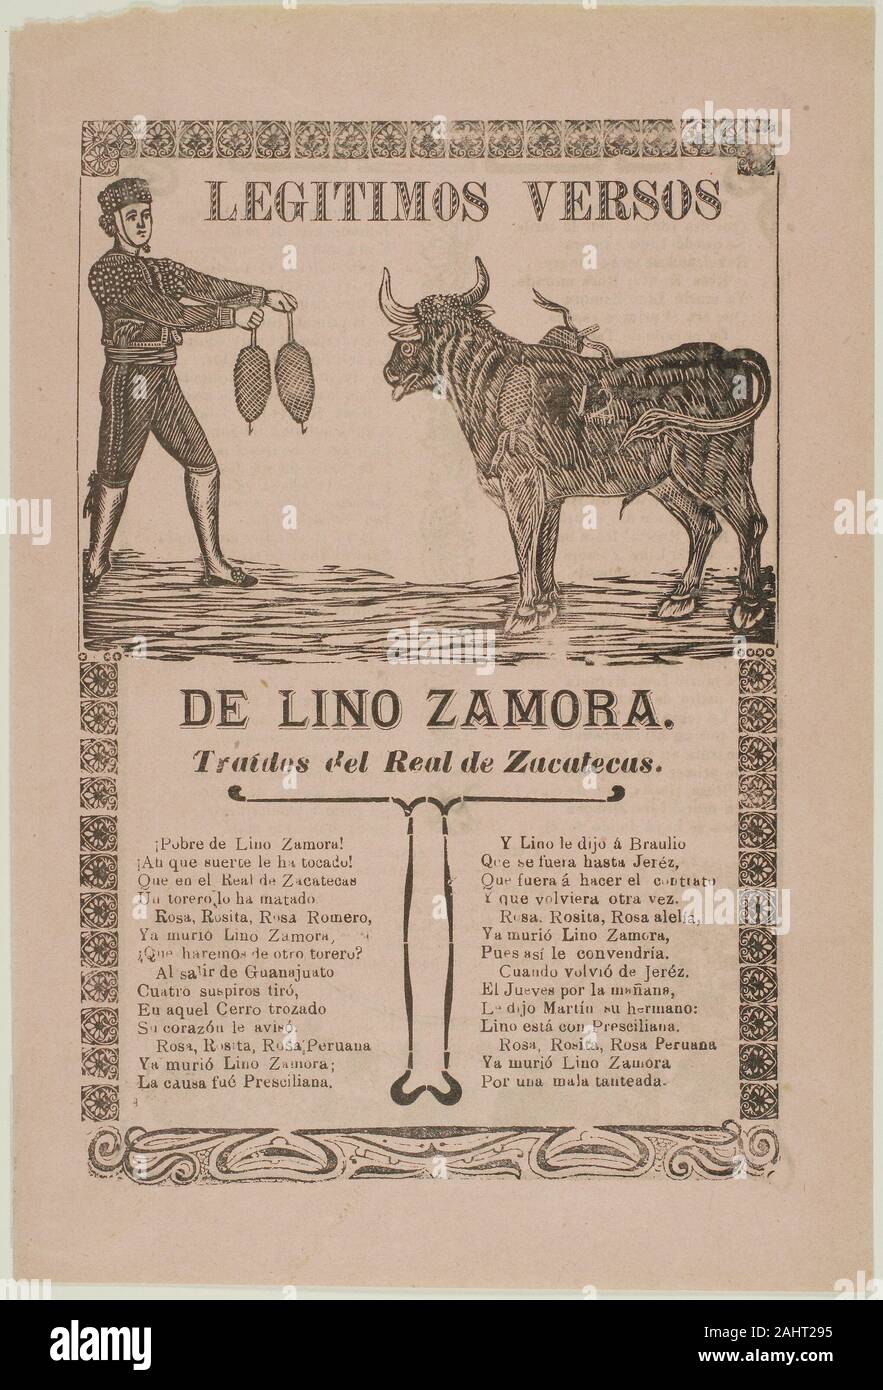 José Guadalupe Posada. True Verses about Lino Zamora. 1911. México. Relief engraving or photo relief etching on pink wove paper Stock Photo